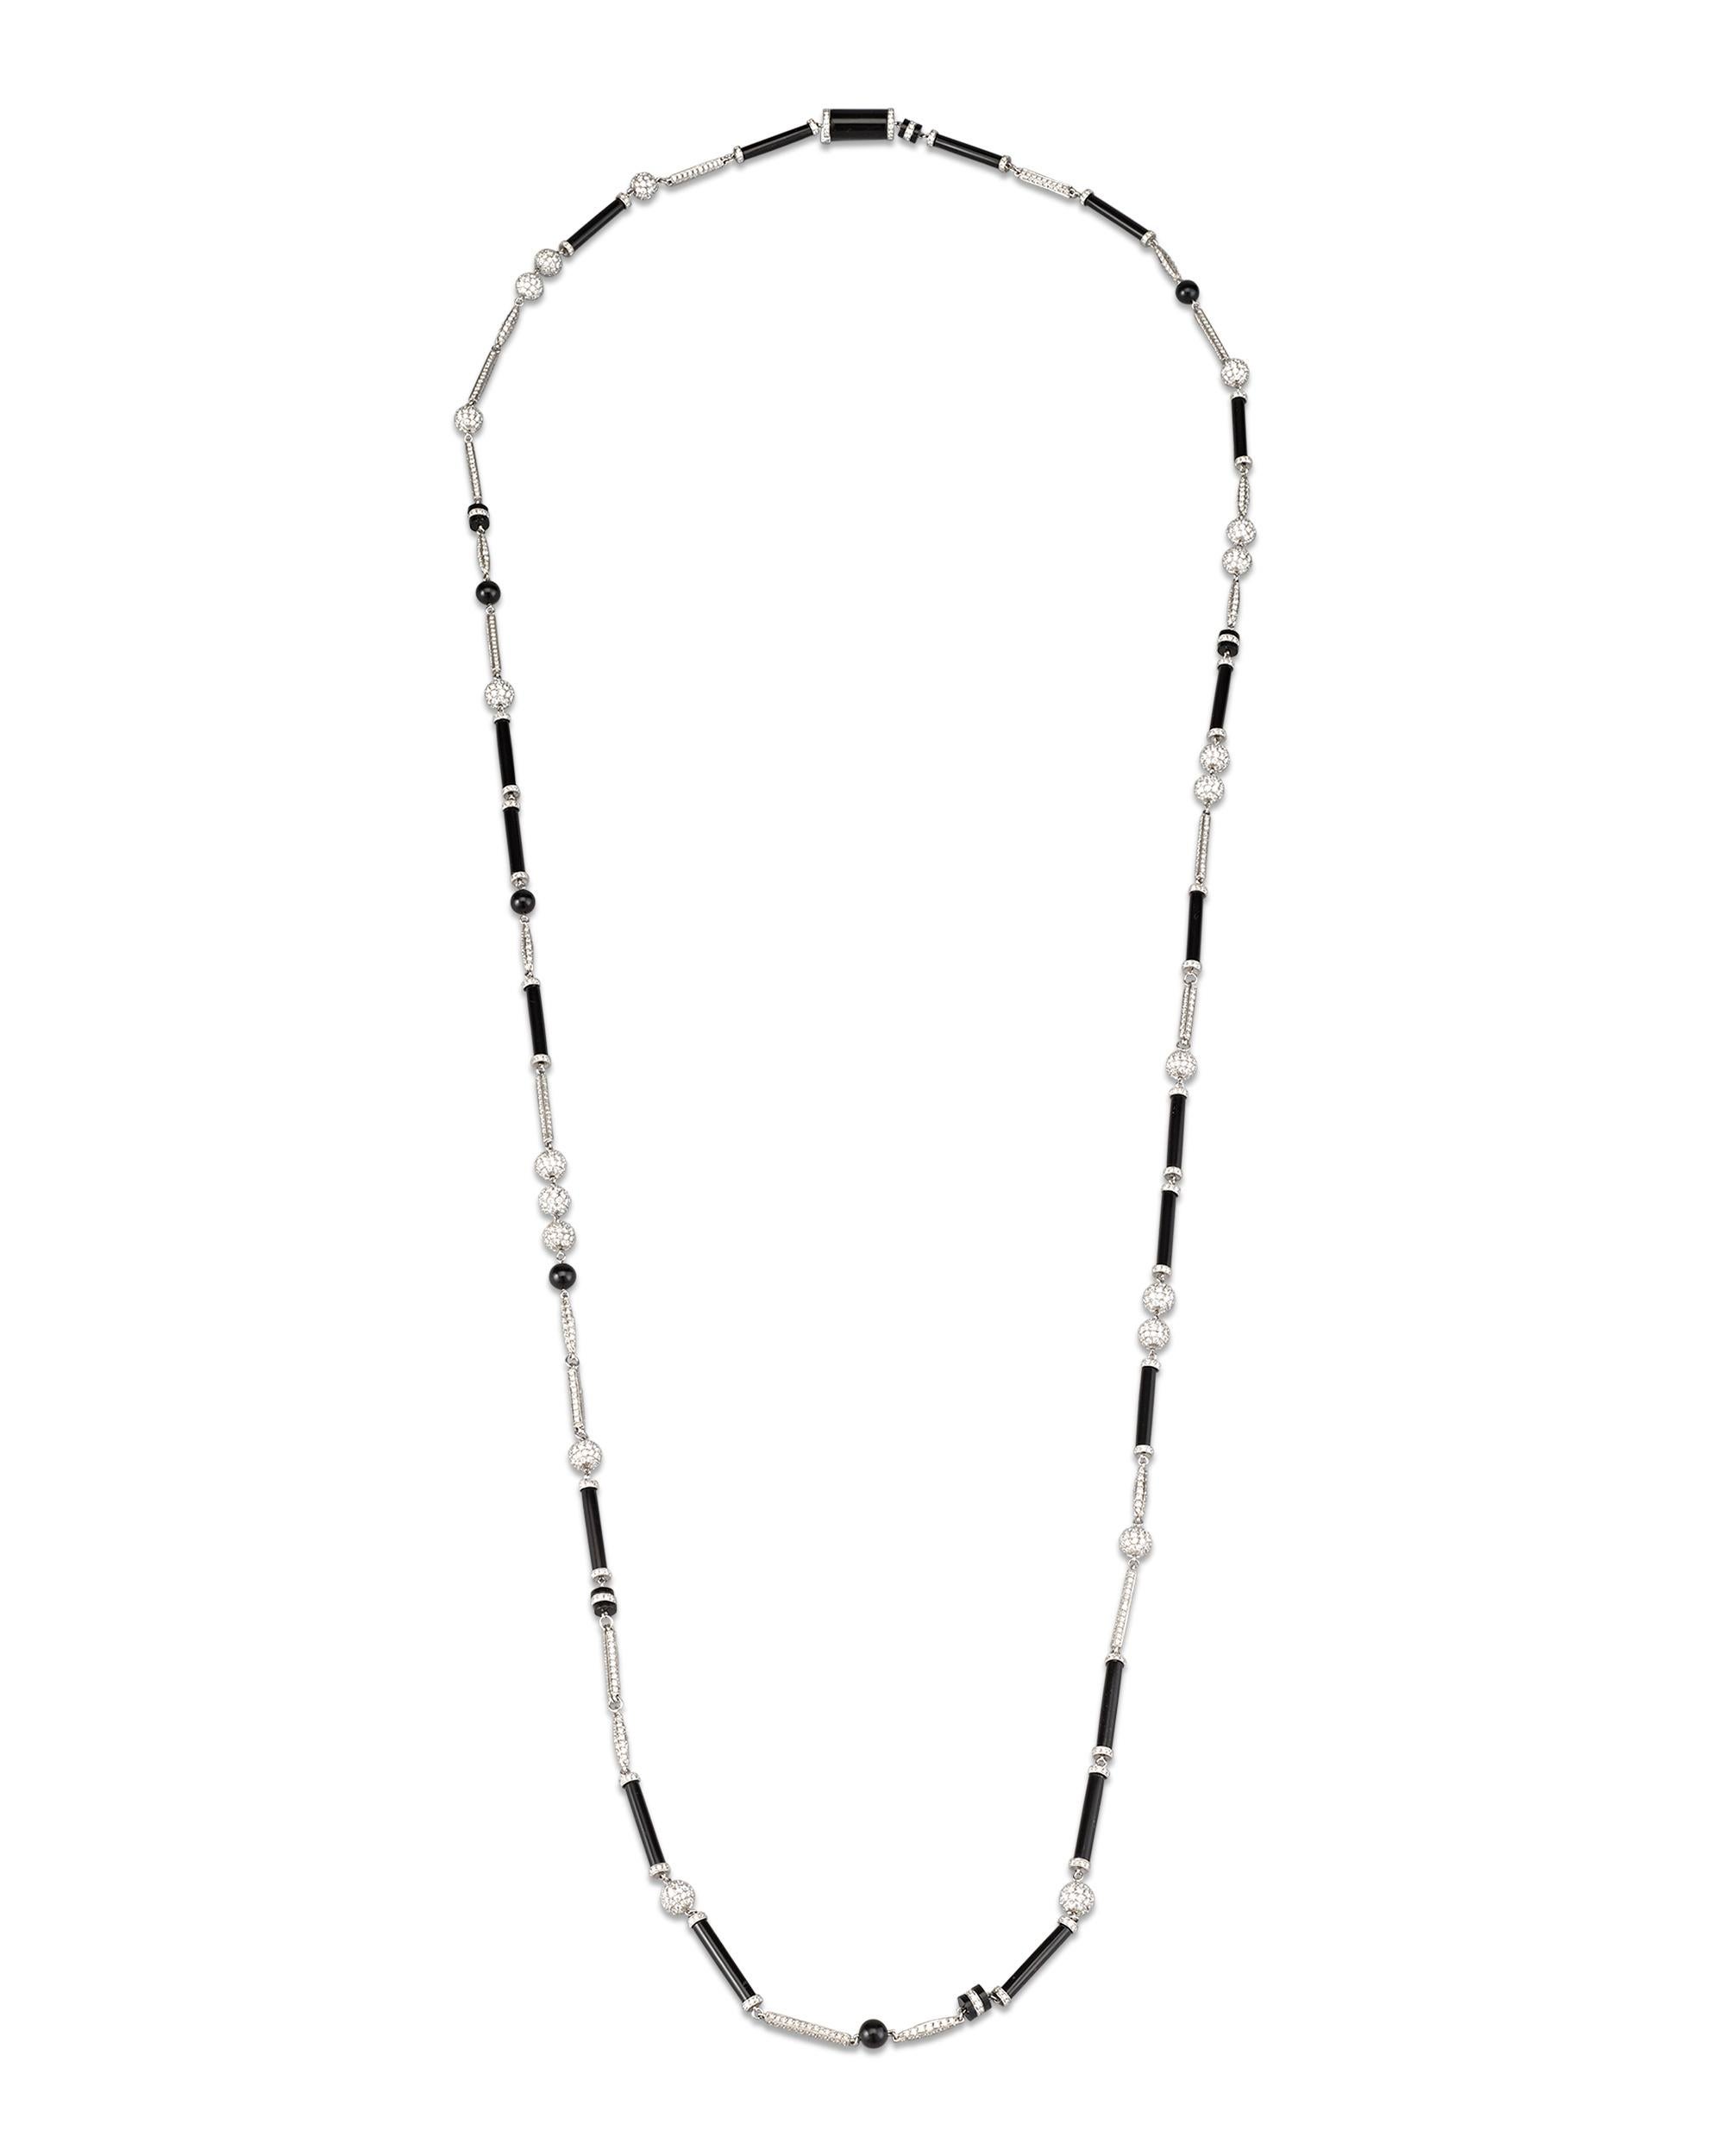 Smooth and elegant onyx is beautifully blended with shimmering diamonds in this sophisticated platinum necklace by Tiffany & Co. The array of spheres, bars and rondelles create a truly timeless and versatile look.

Signed 